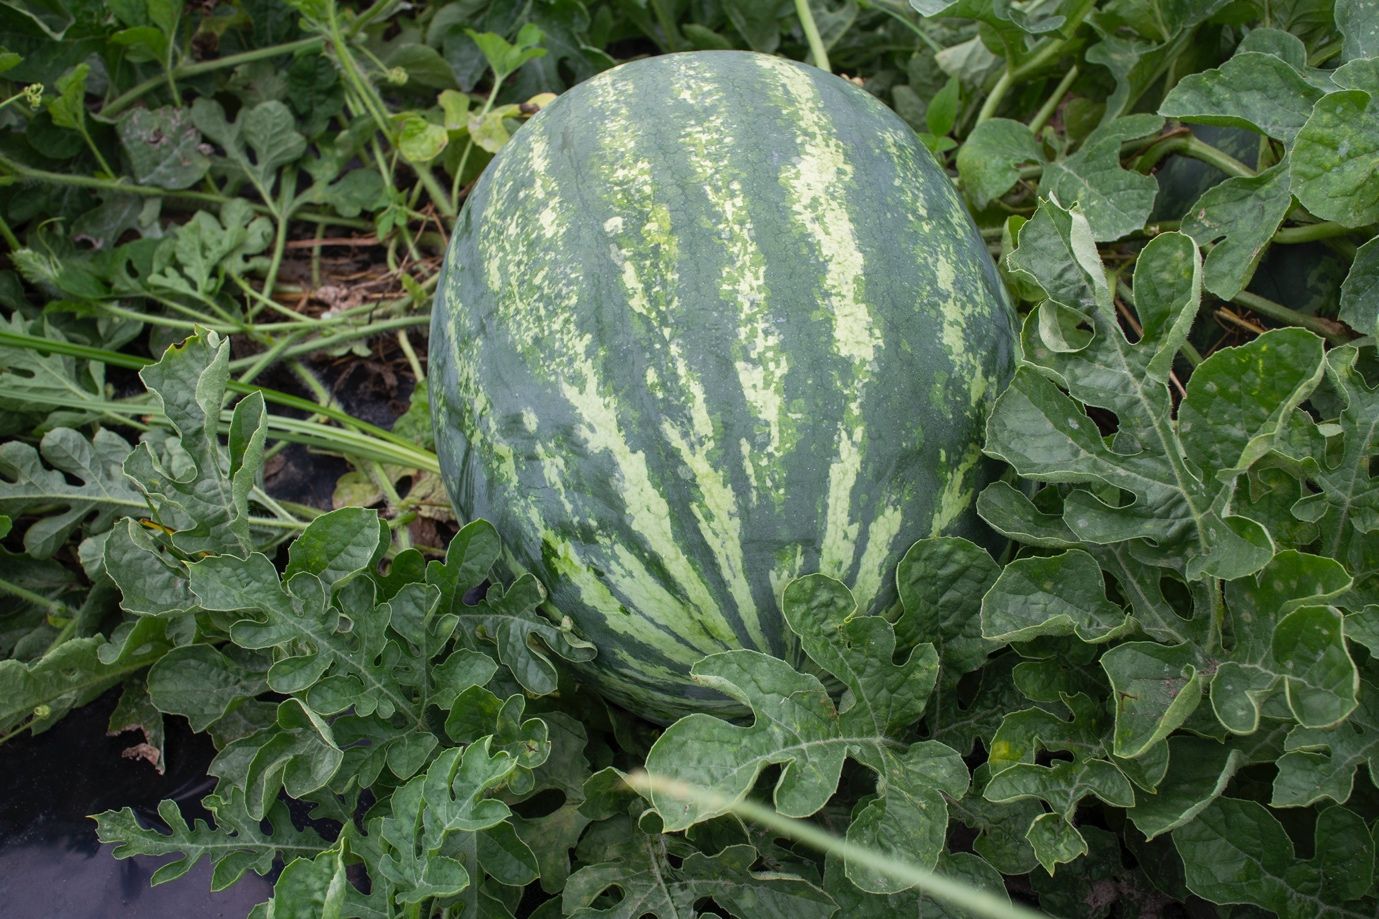 A watermelon growing in a plant

Description automatically generated with medium confidence